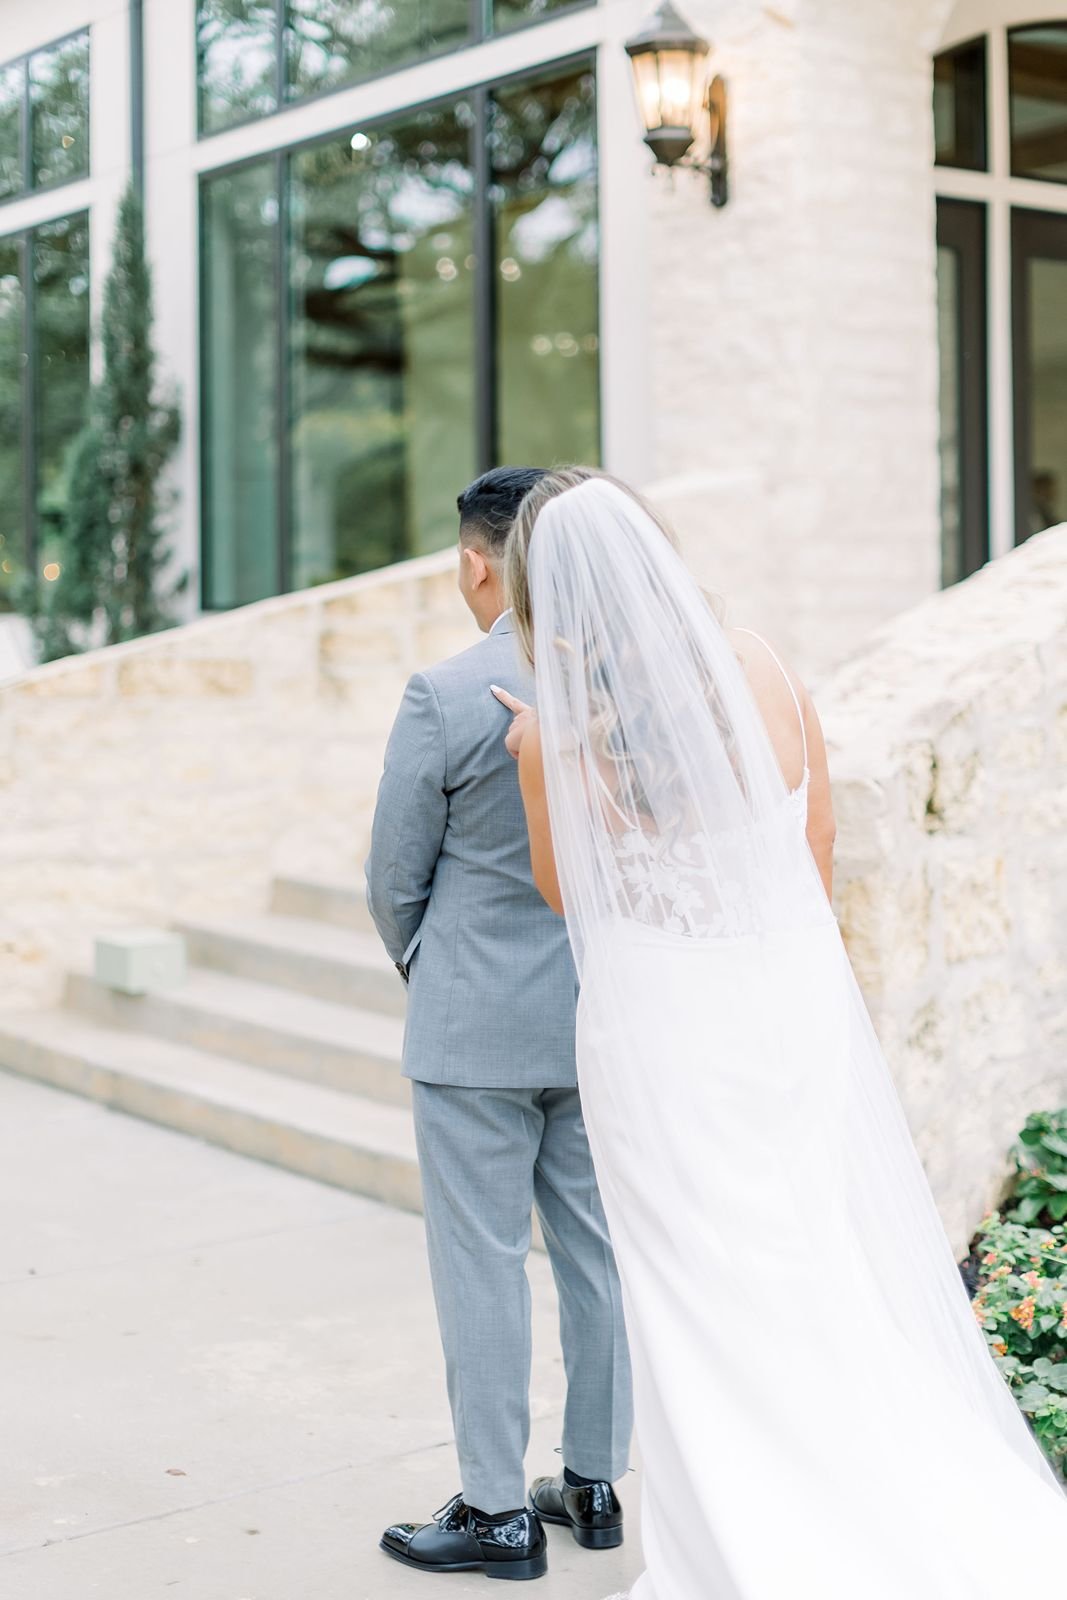 Canyon Lake wedding Bride and groom First look by the preserve